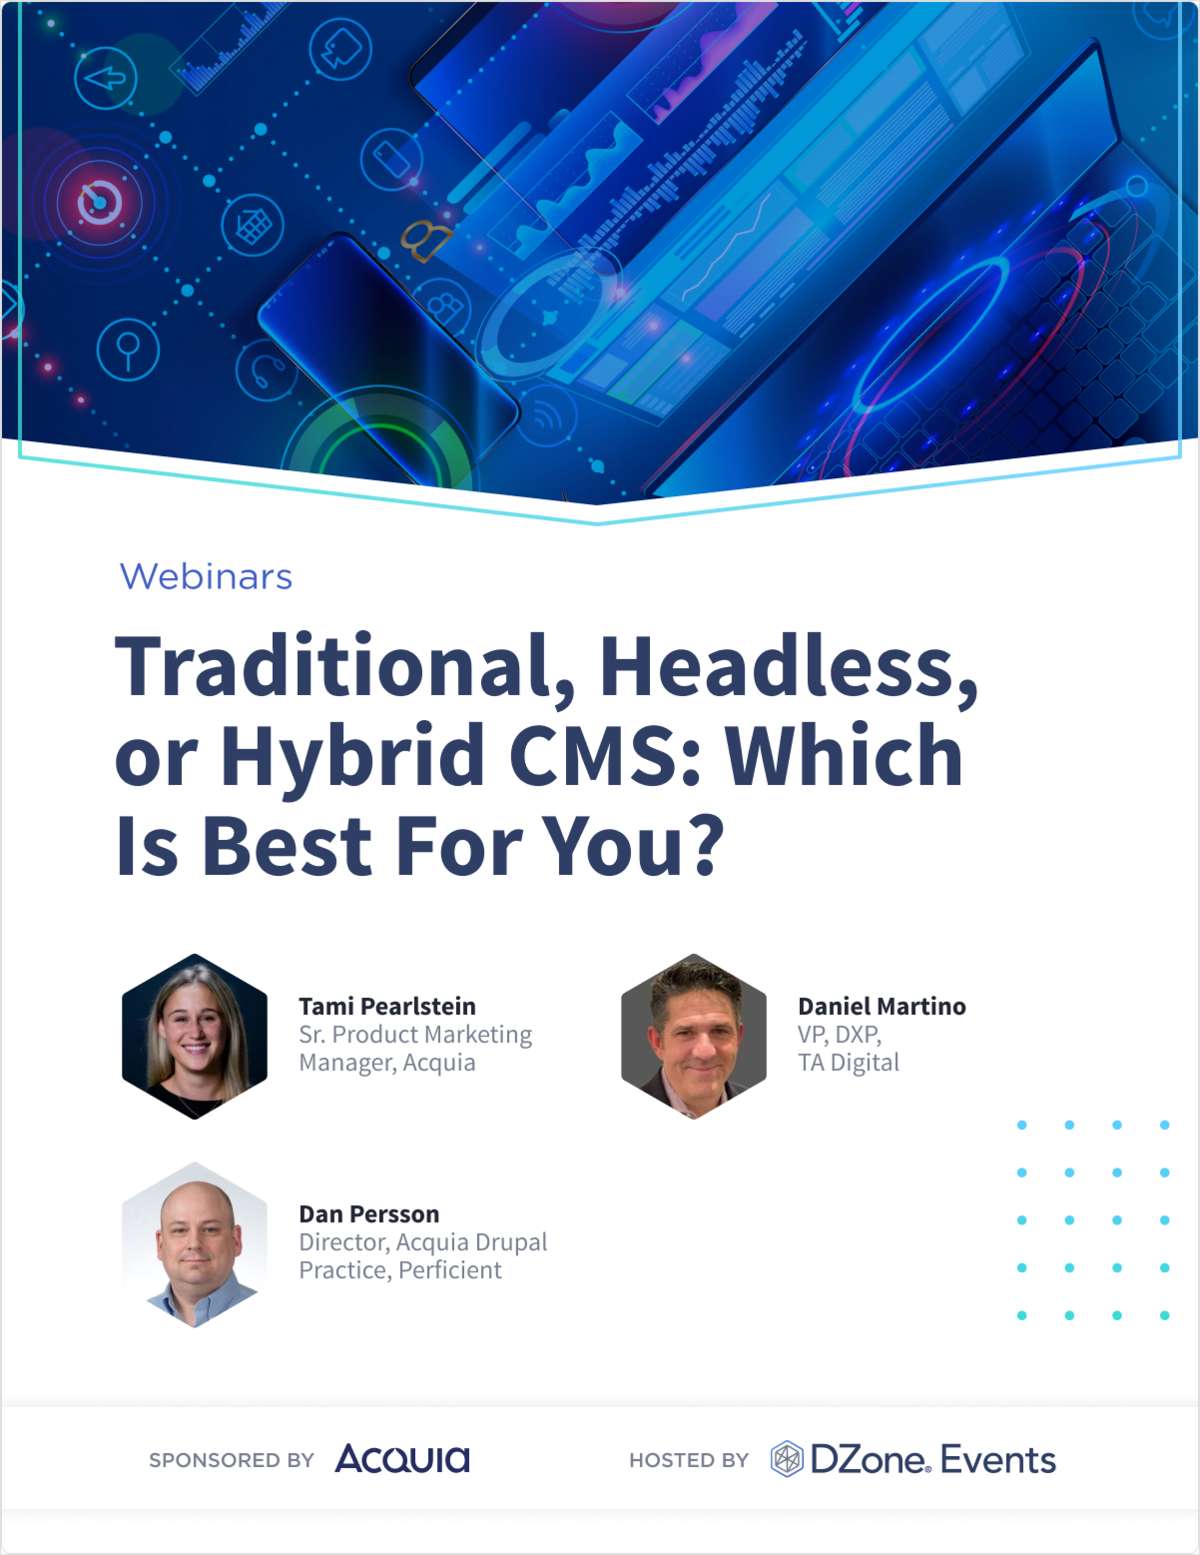 Traditional, Headless, or Hybrid CMS: Which Is Best For You?